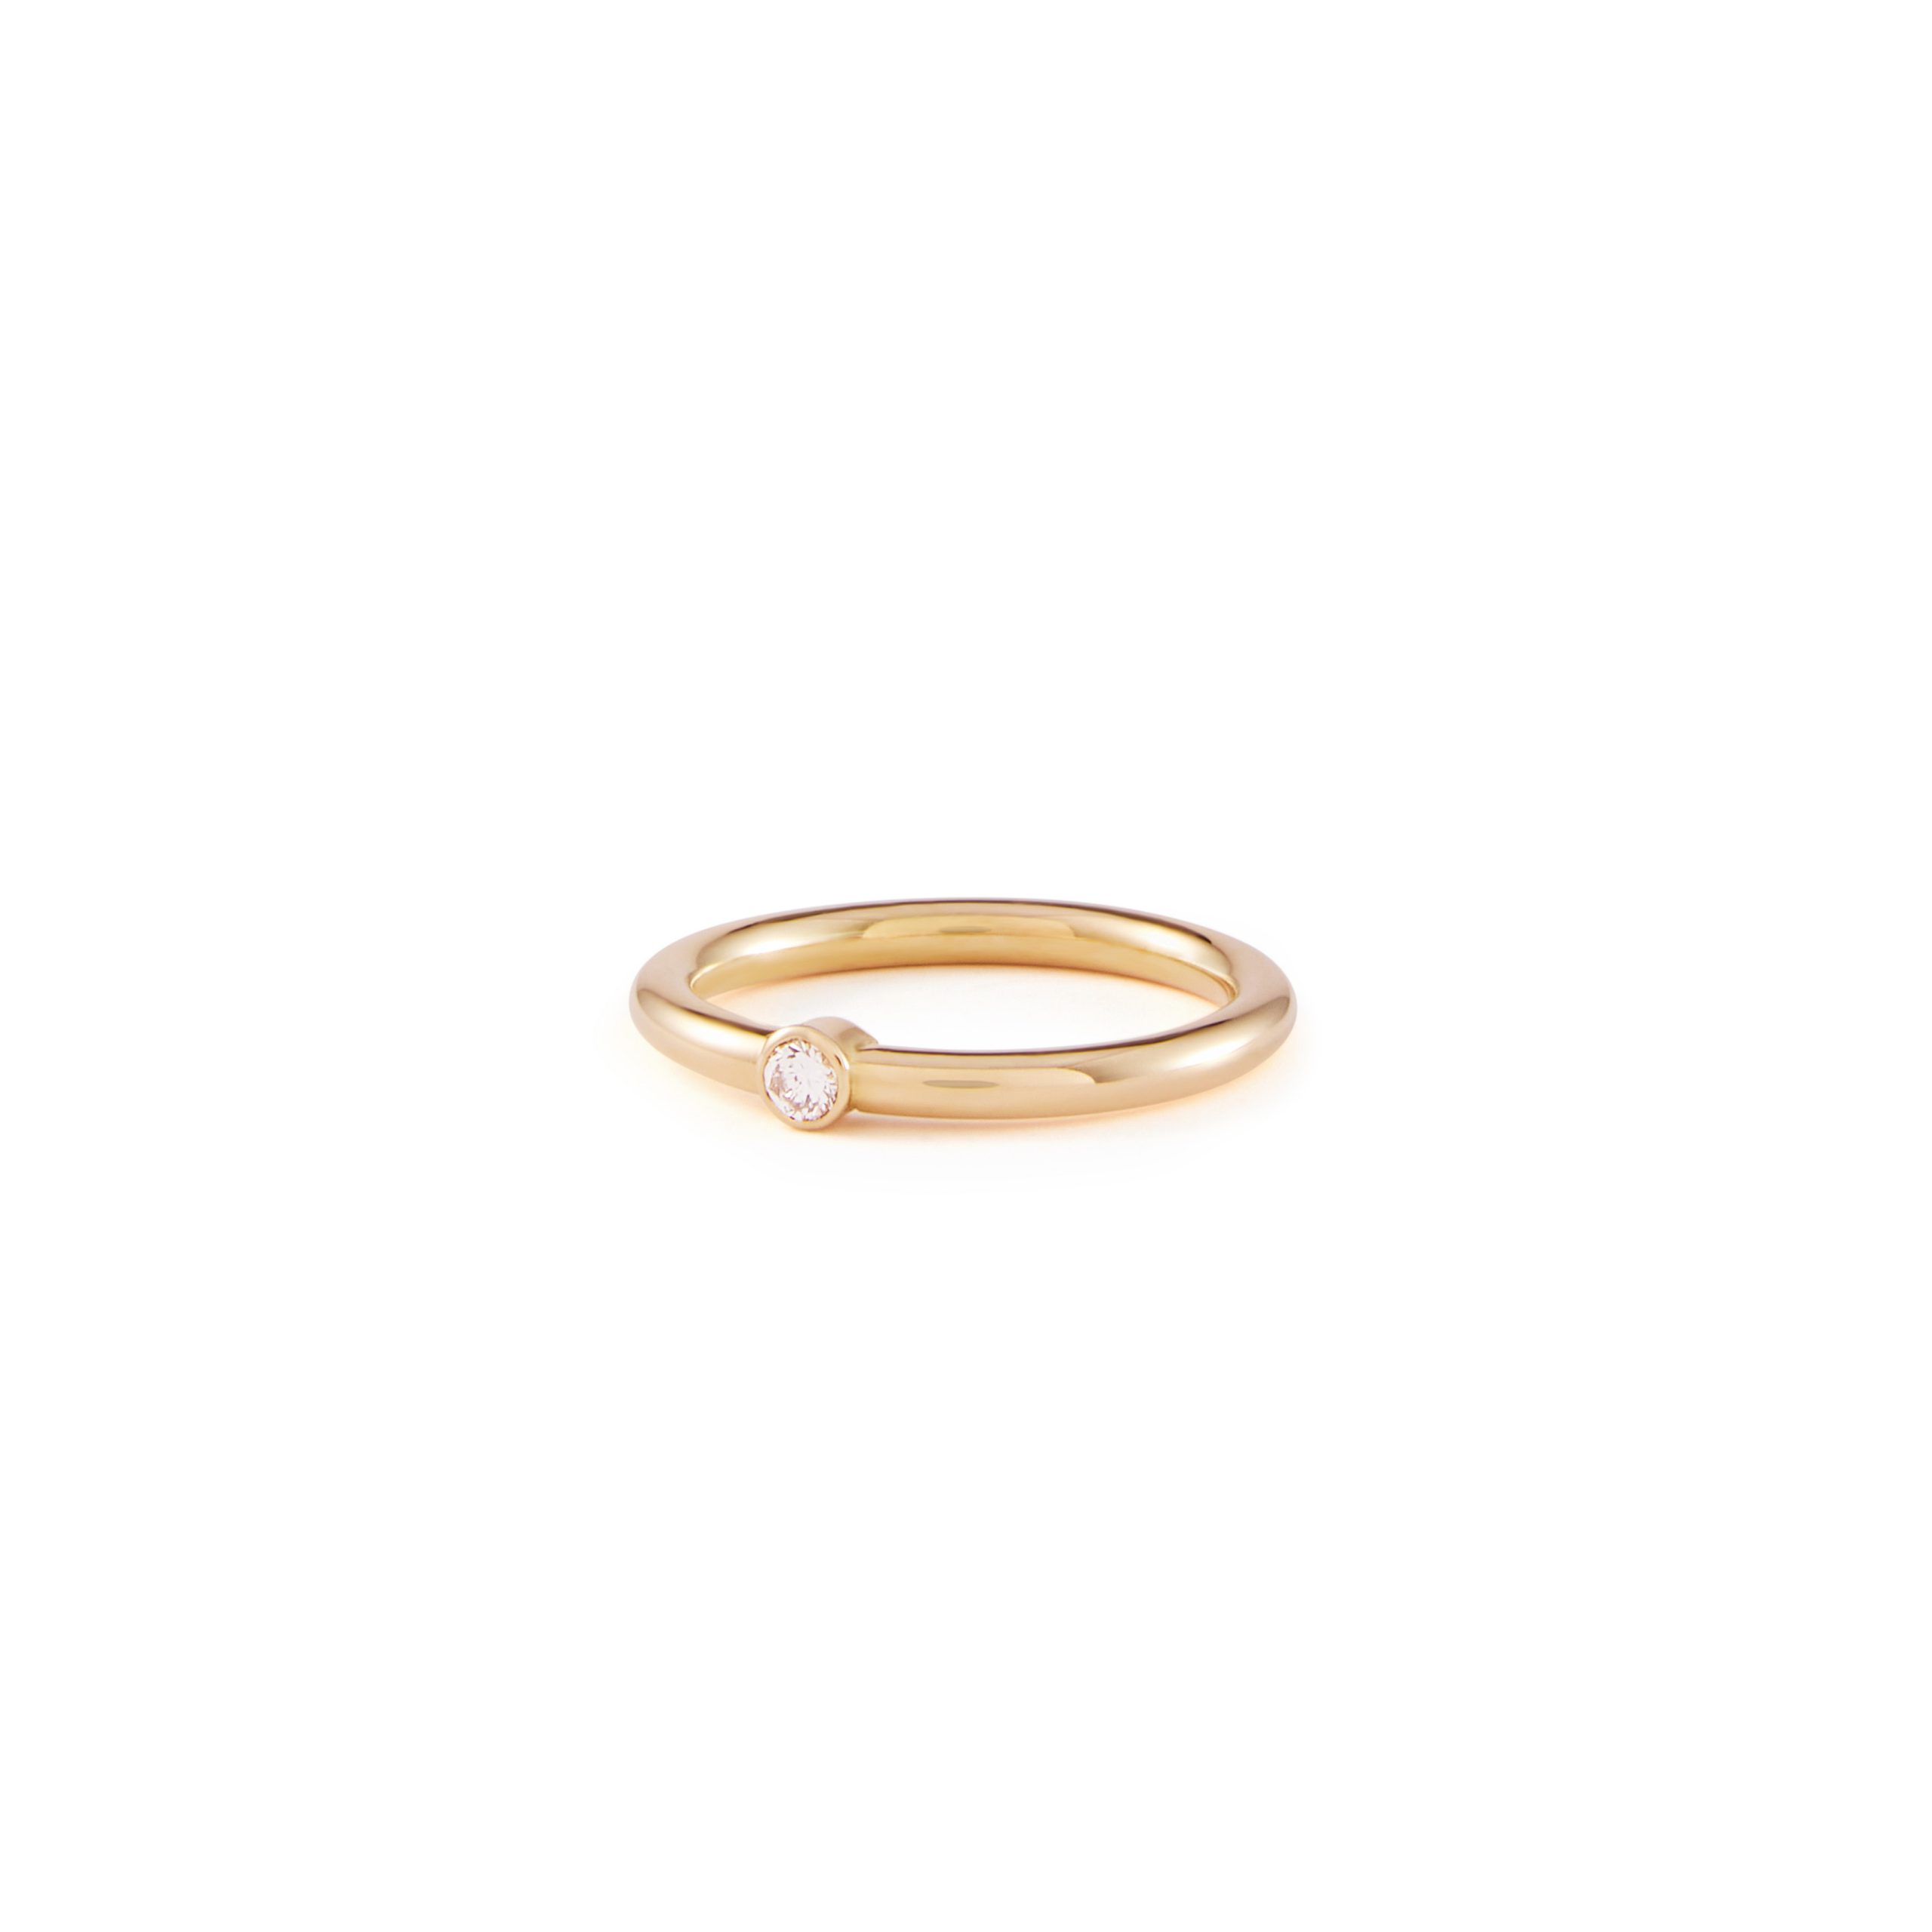 18ct Yellow Gold and Bezel Diamond Ring. - Lind Jewellery Design